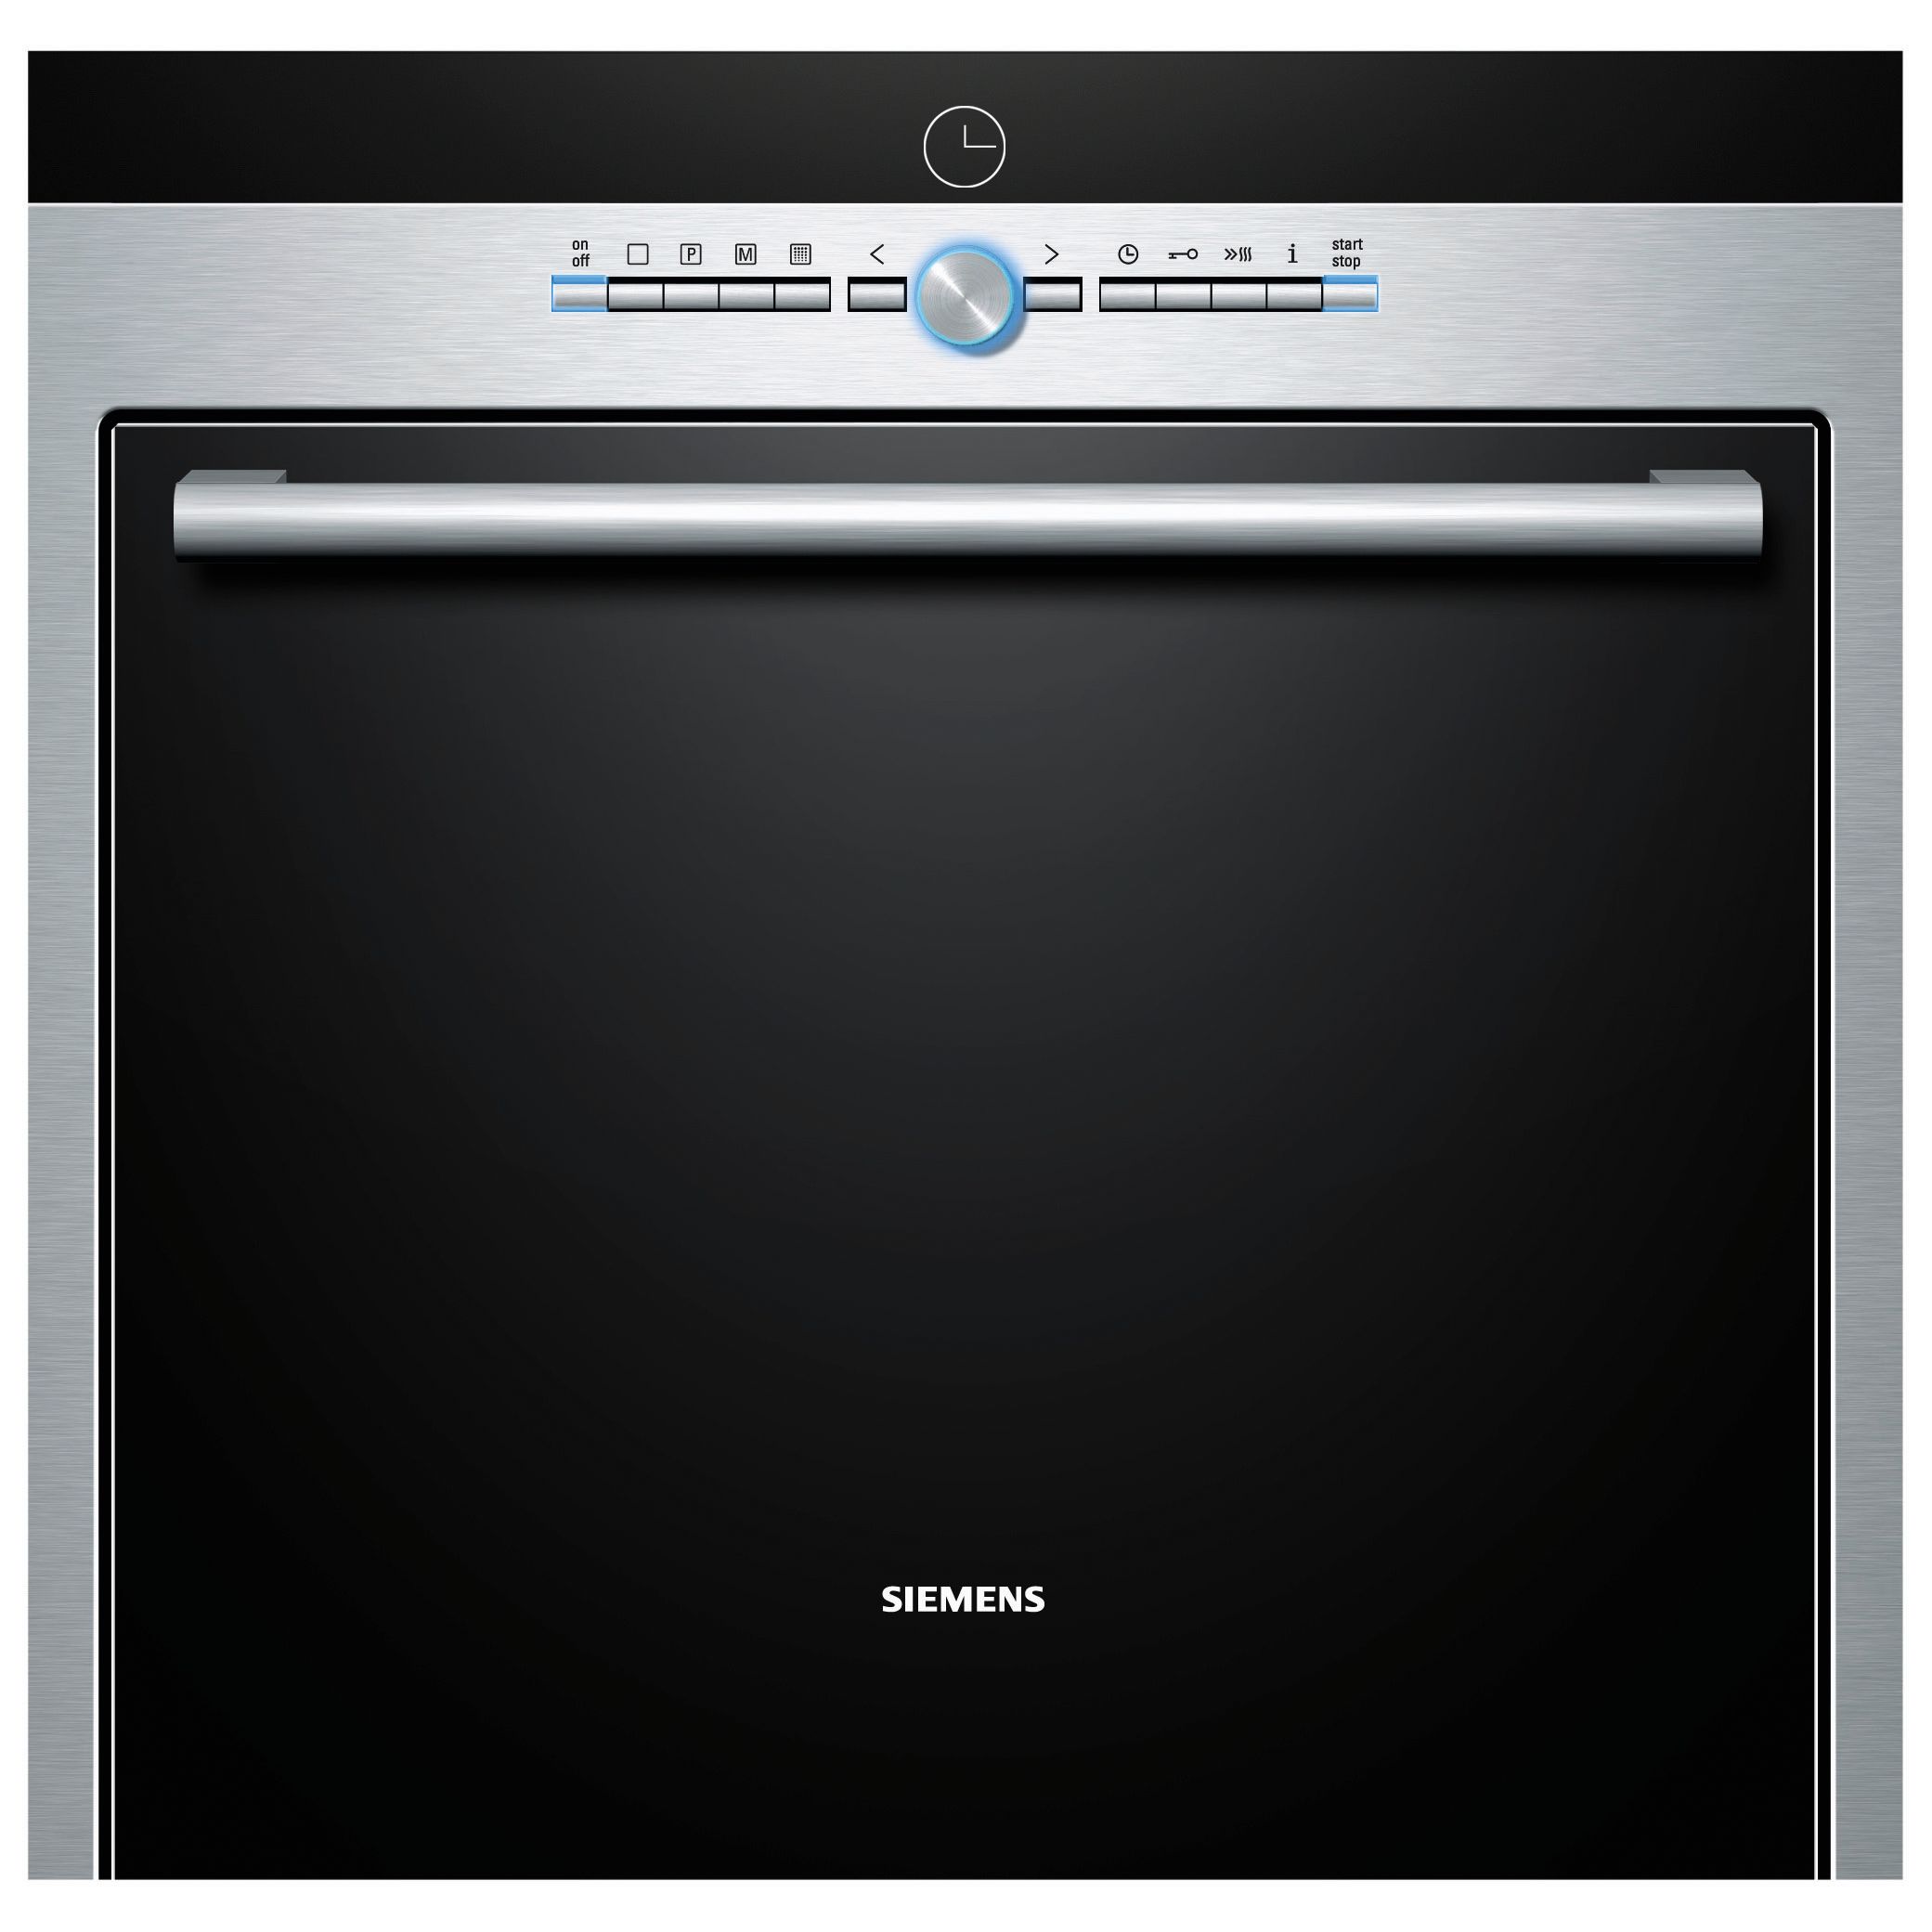 Siemens HB78AB570B Single Electric Oven, Stainless Steel at John Lewis